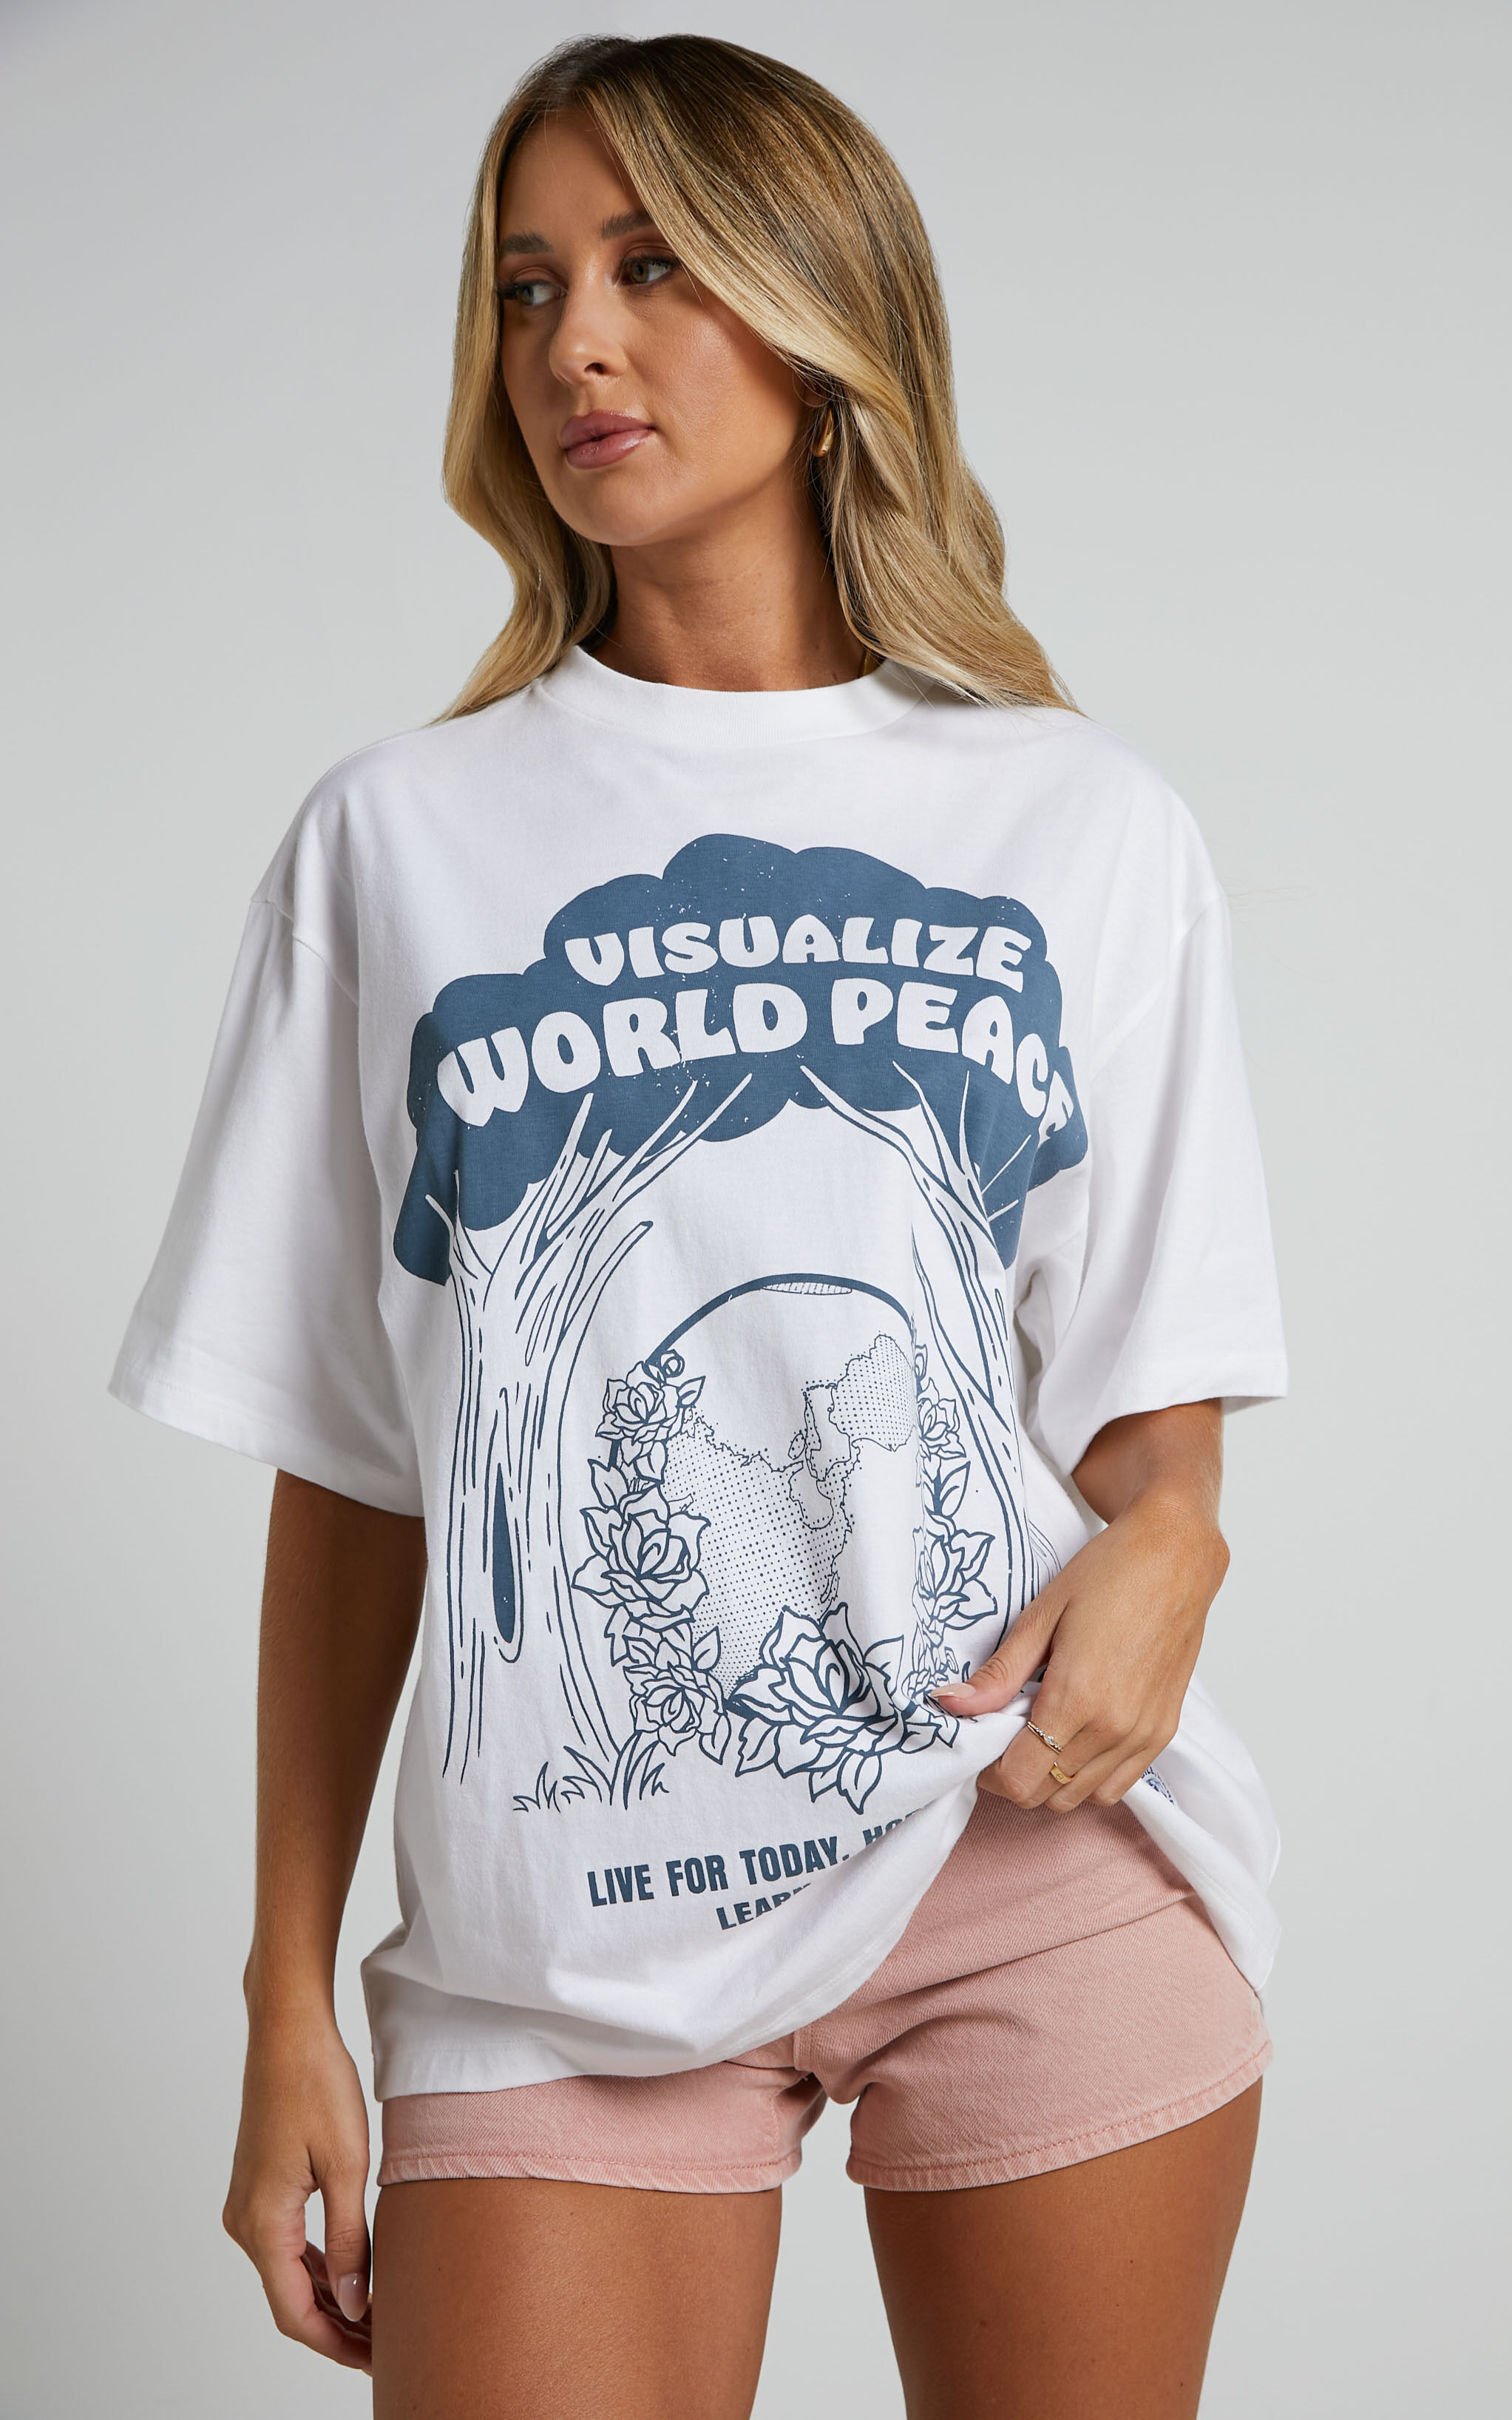 Levi's - GRAPHIC SHORT STACK TEE in Visualize World Peace Bright White - L, WHT1, super-hi-res image number null